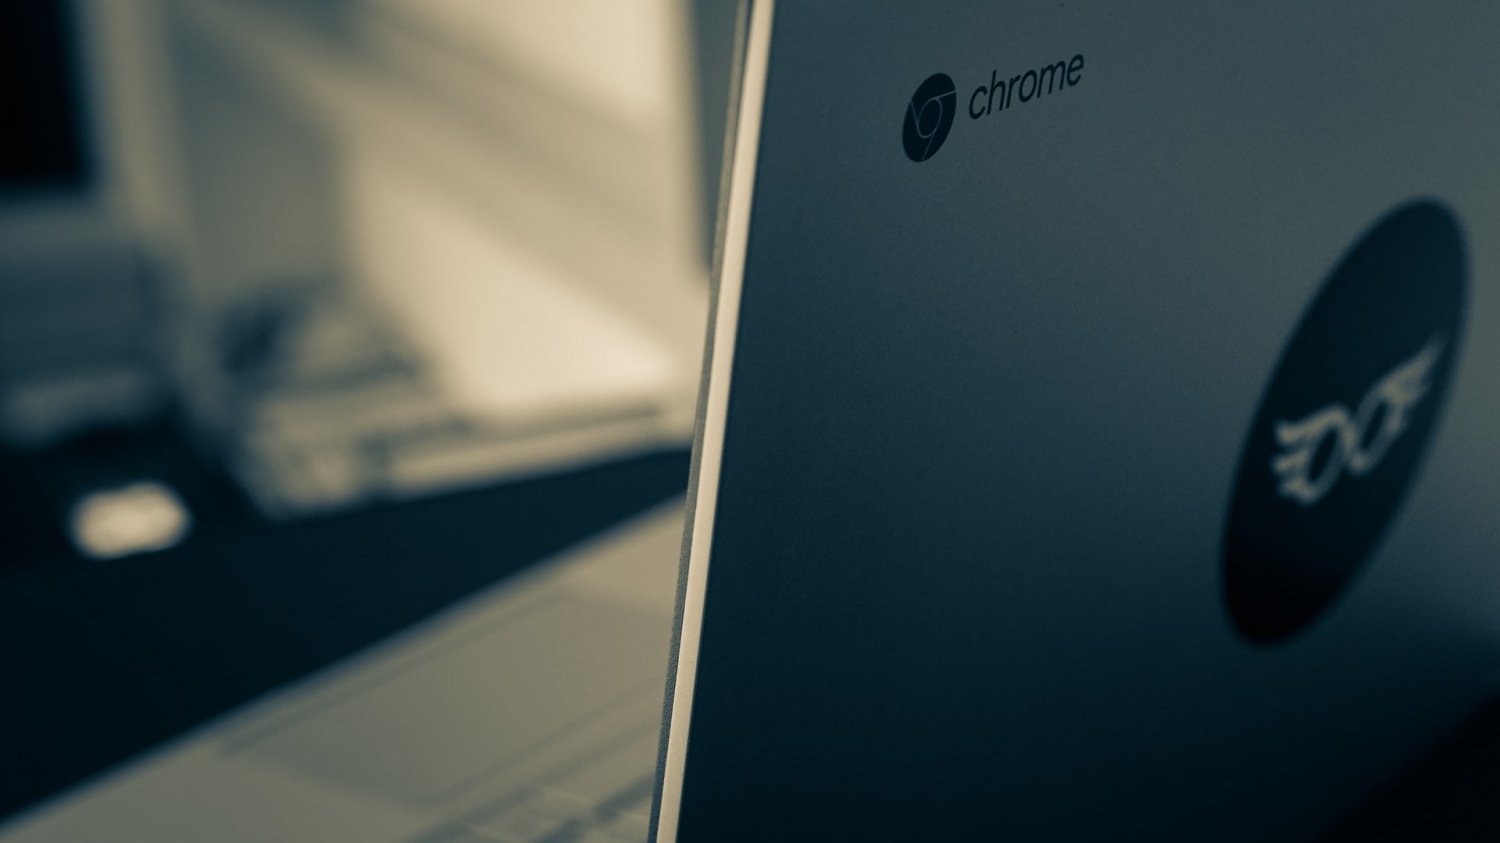 Google Chromebook to Release New Feature that Detects if 'Someone is Looking at Your Screen' | Snooping Detection